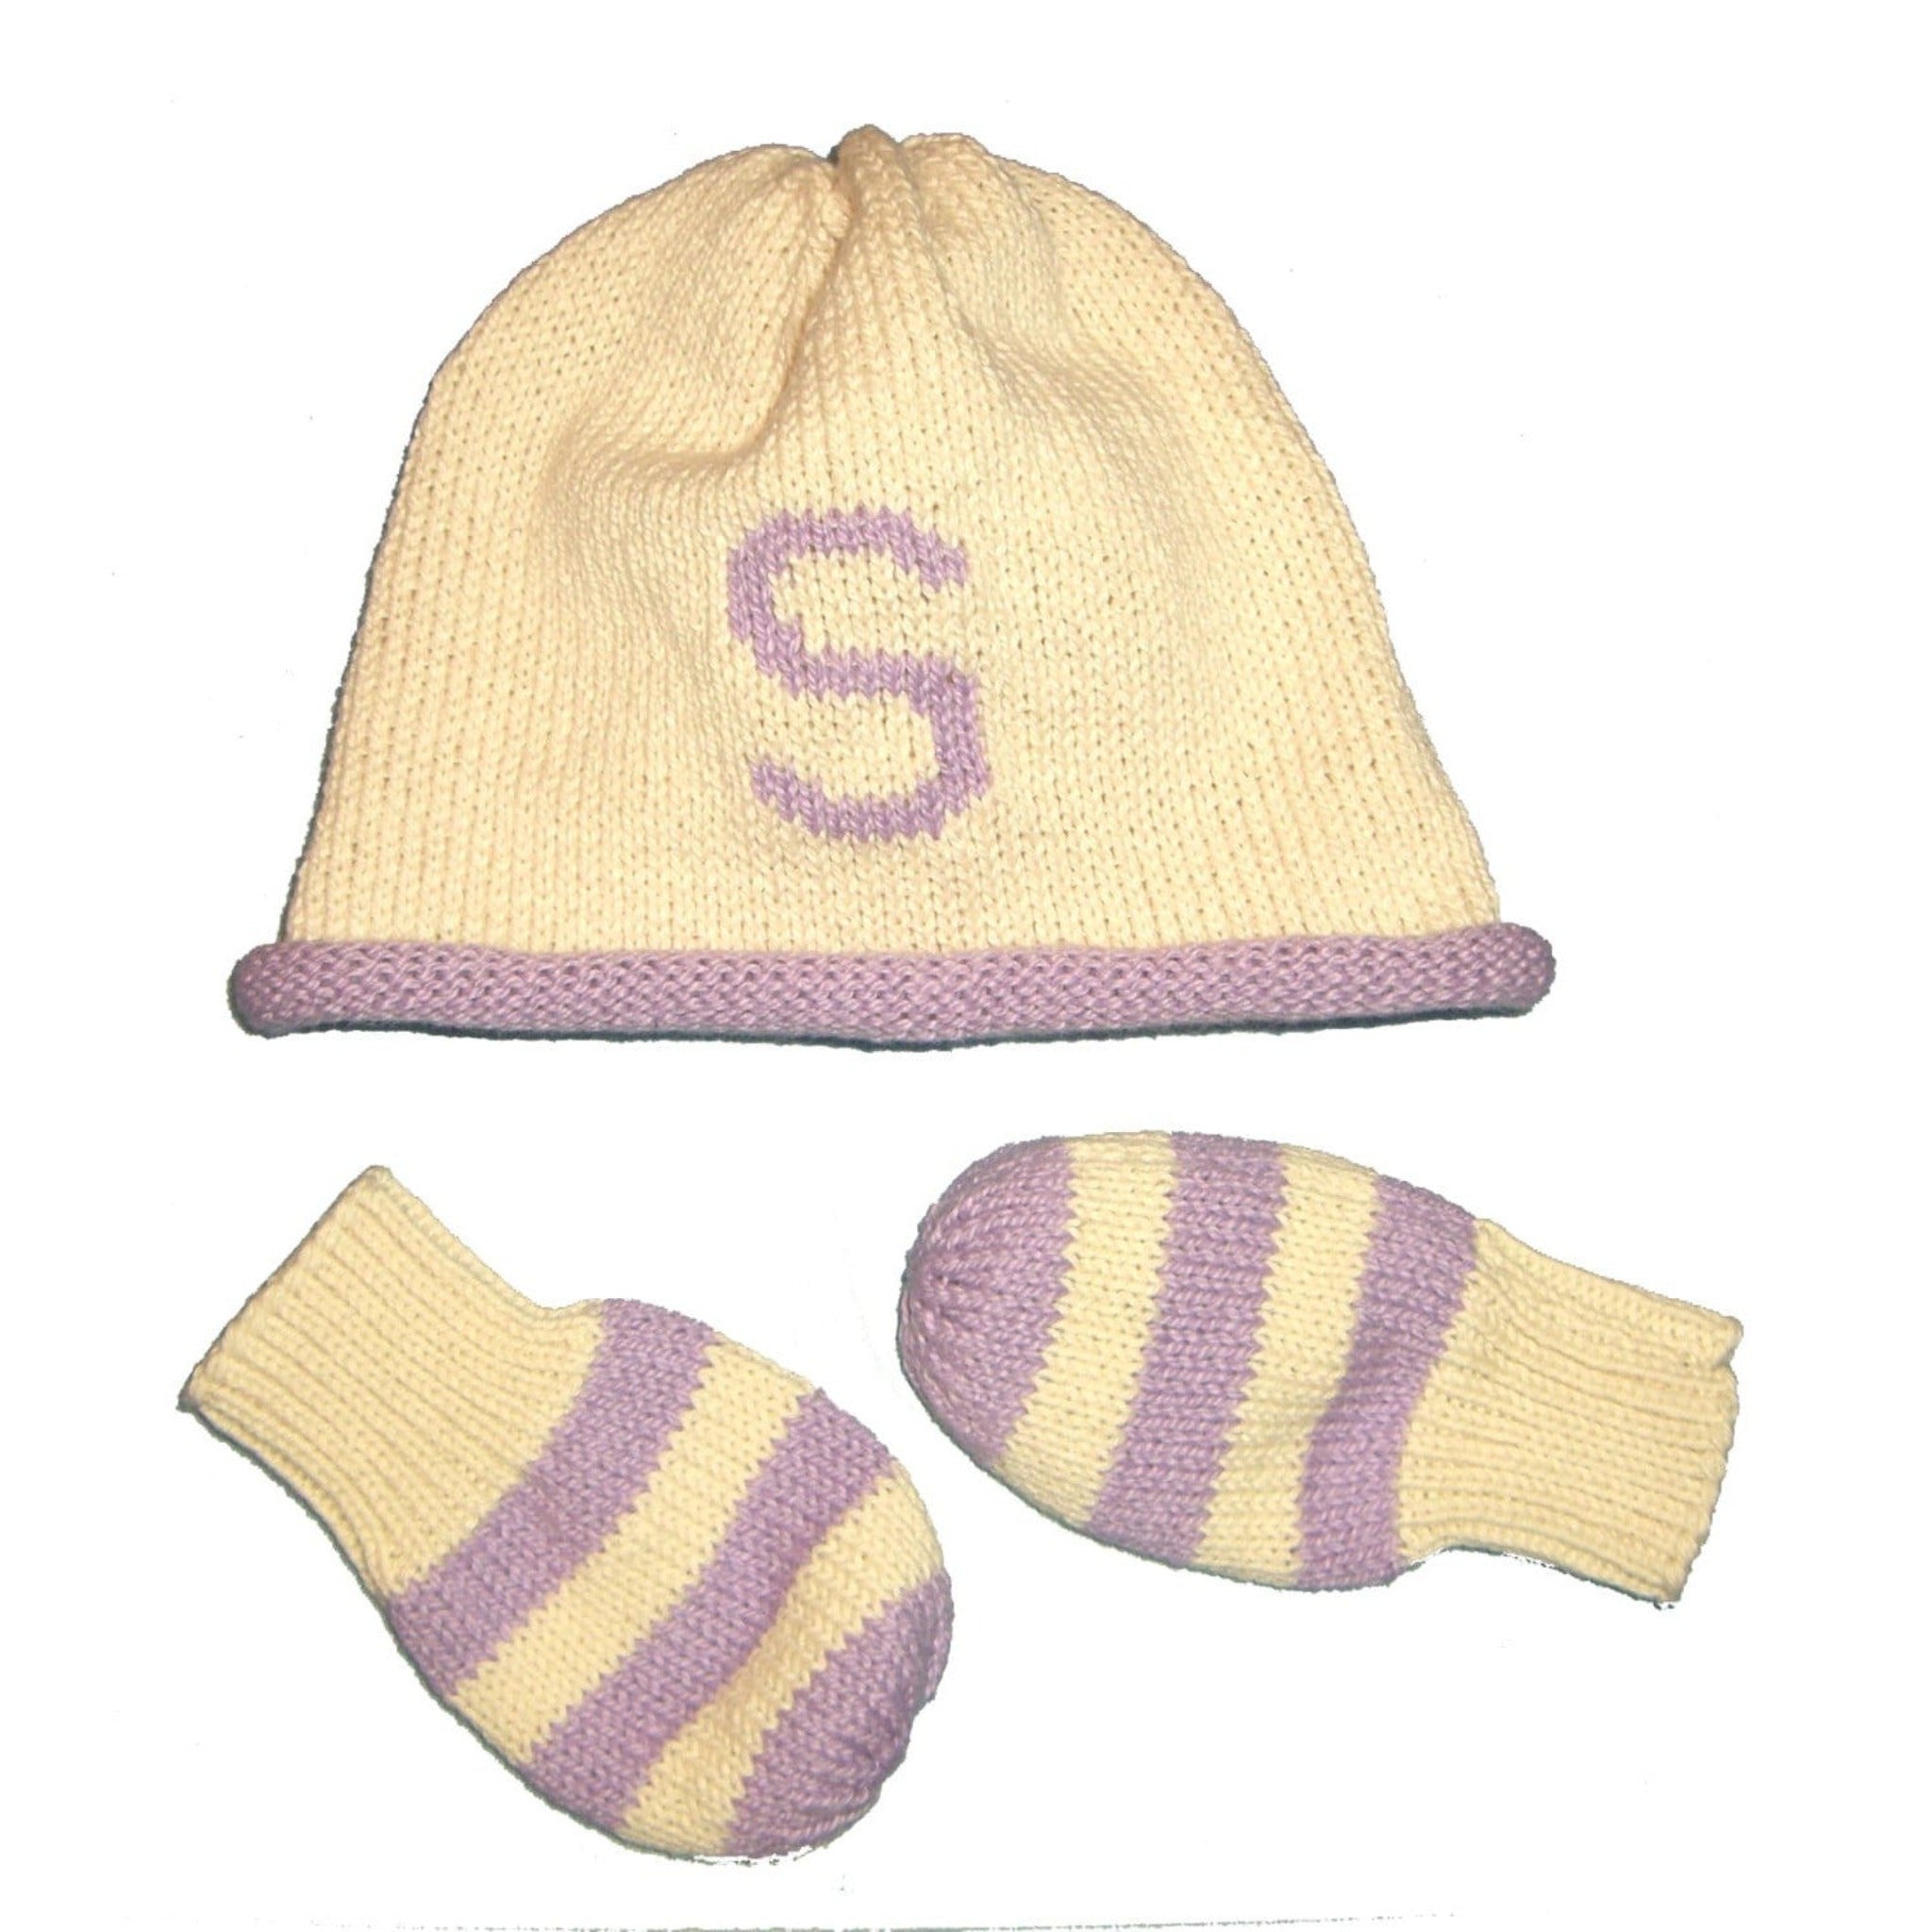 Personalized Hat and Mitten Set For Baby - Custom Knits for Baby